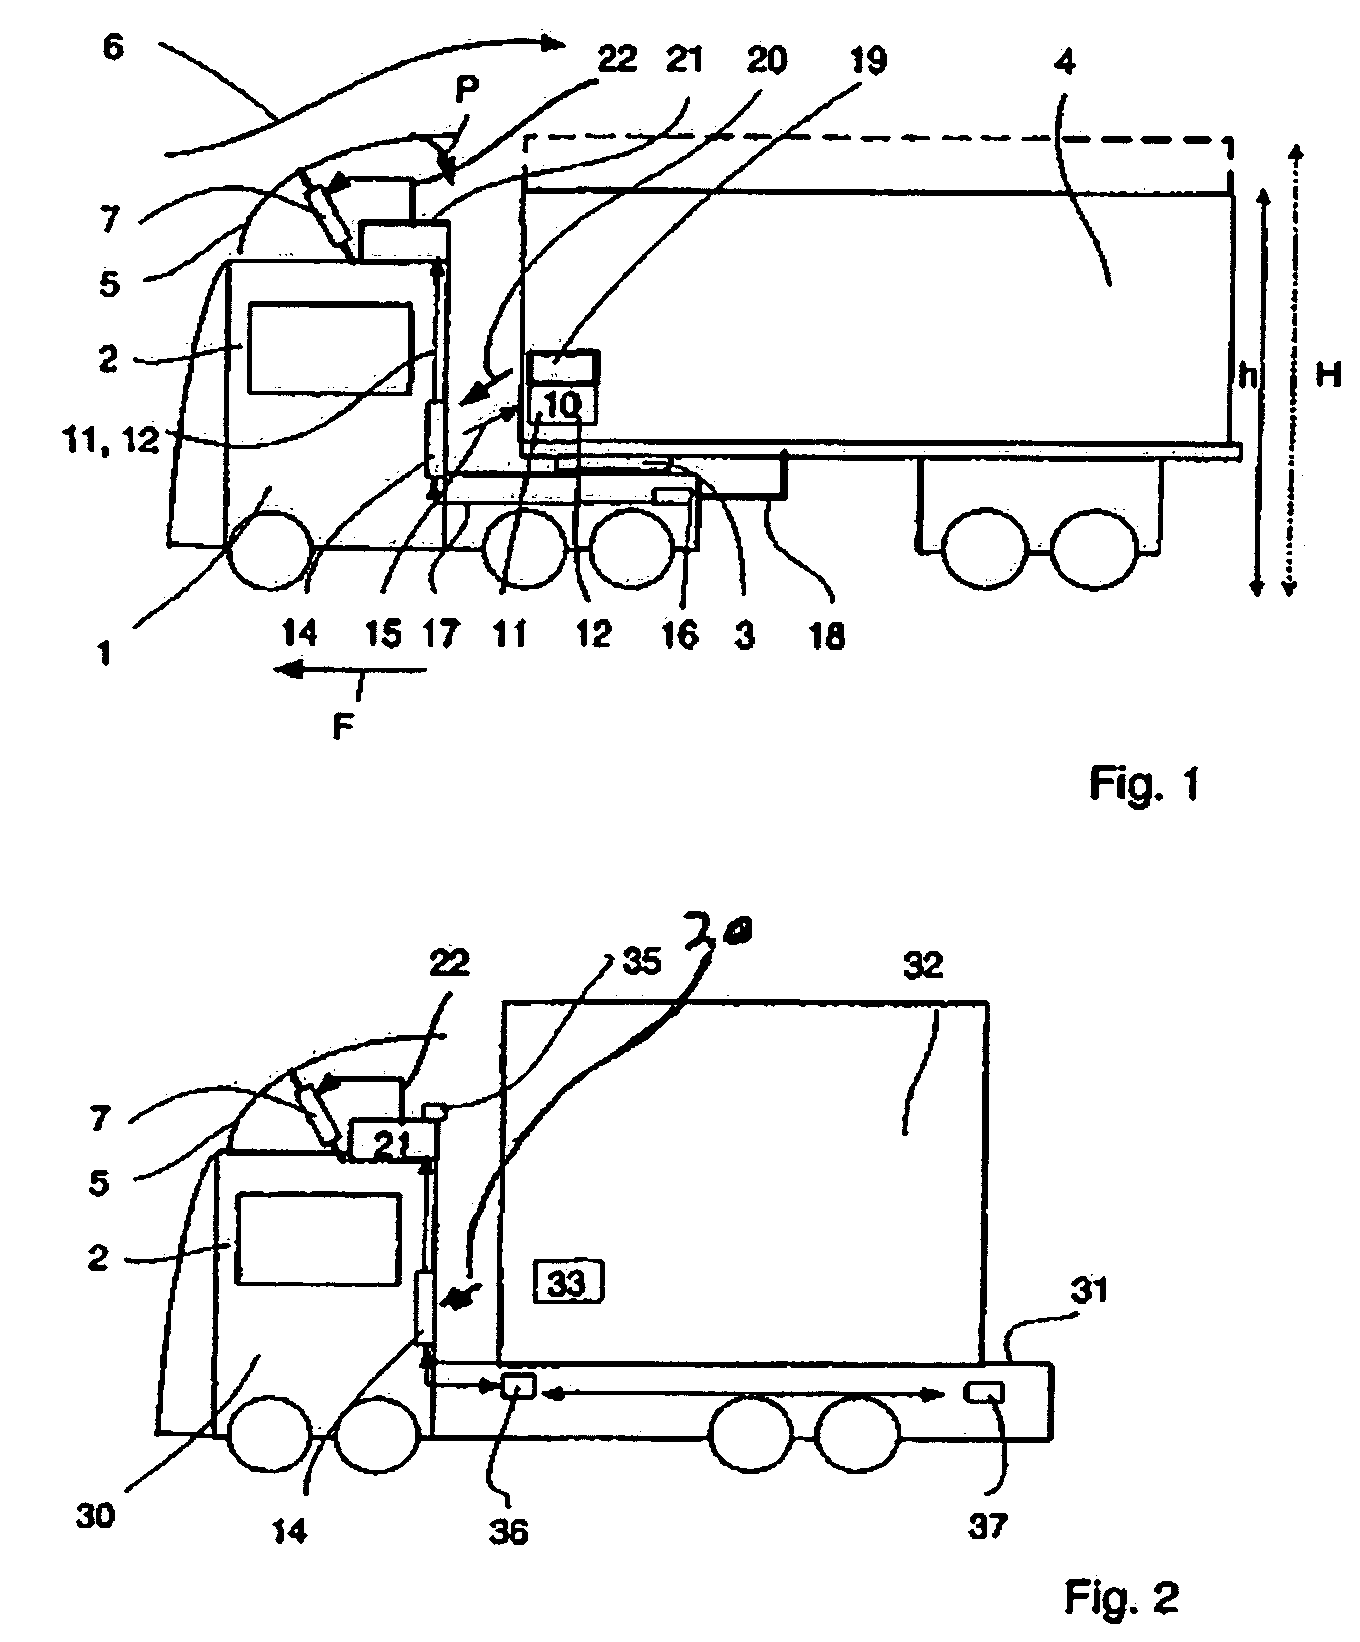 Apparatus for the airflow-optimized orientation of an airflow deflector